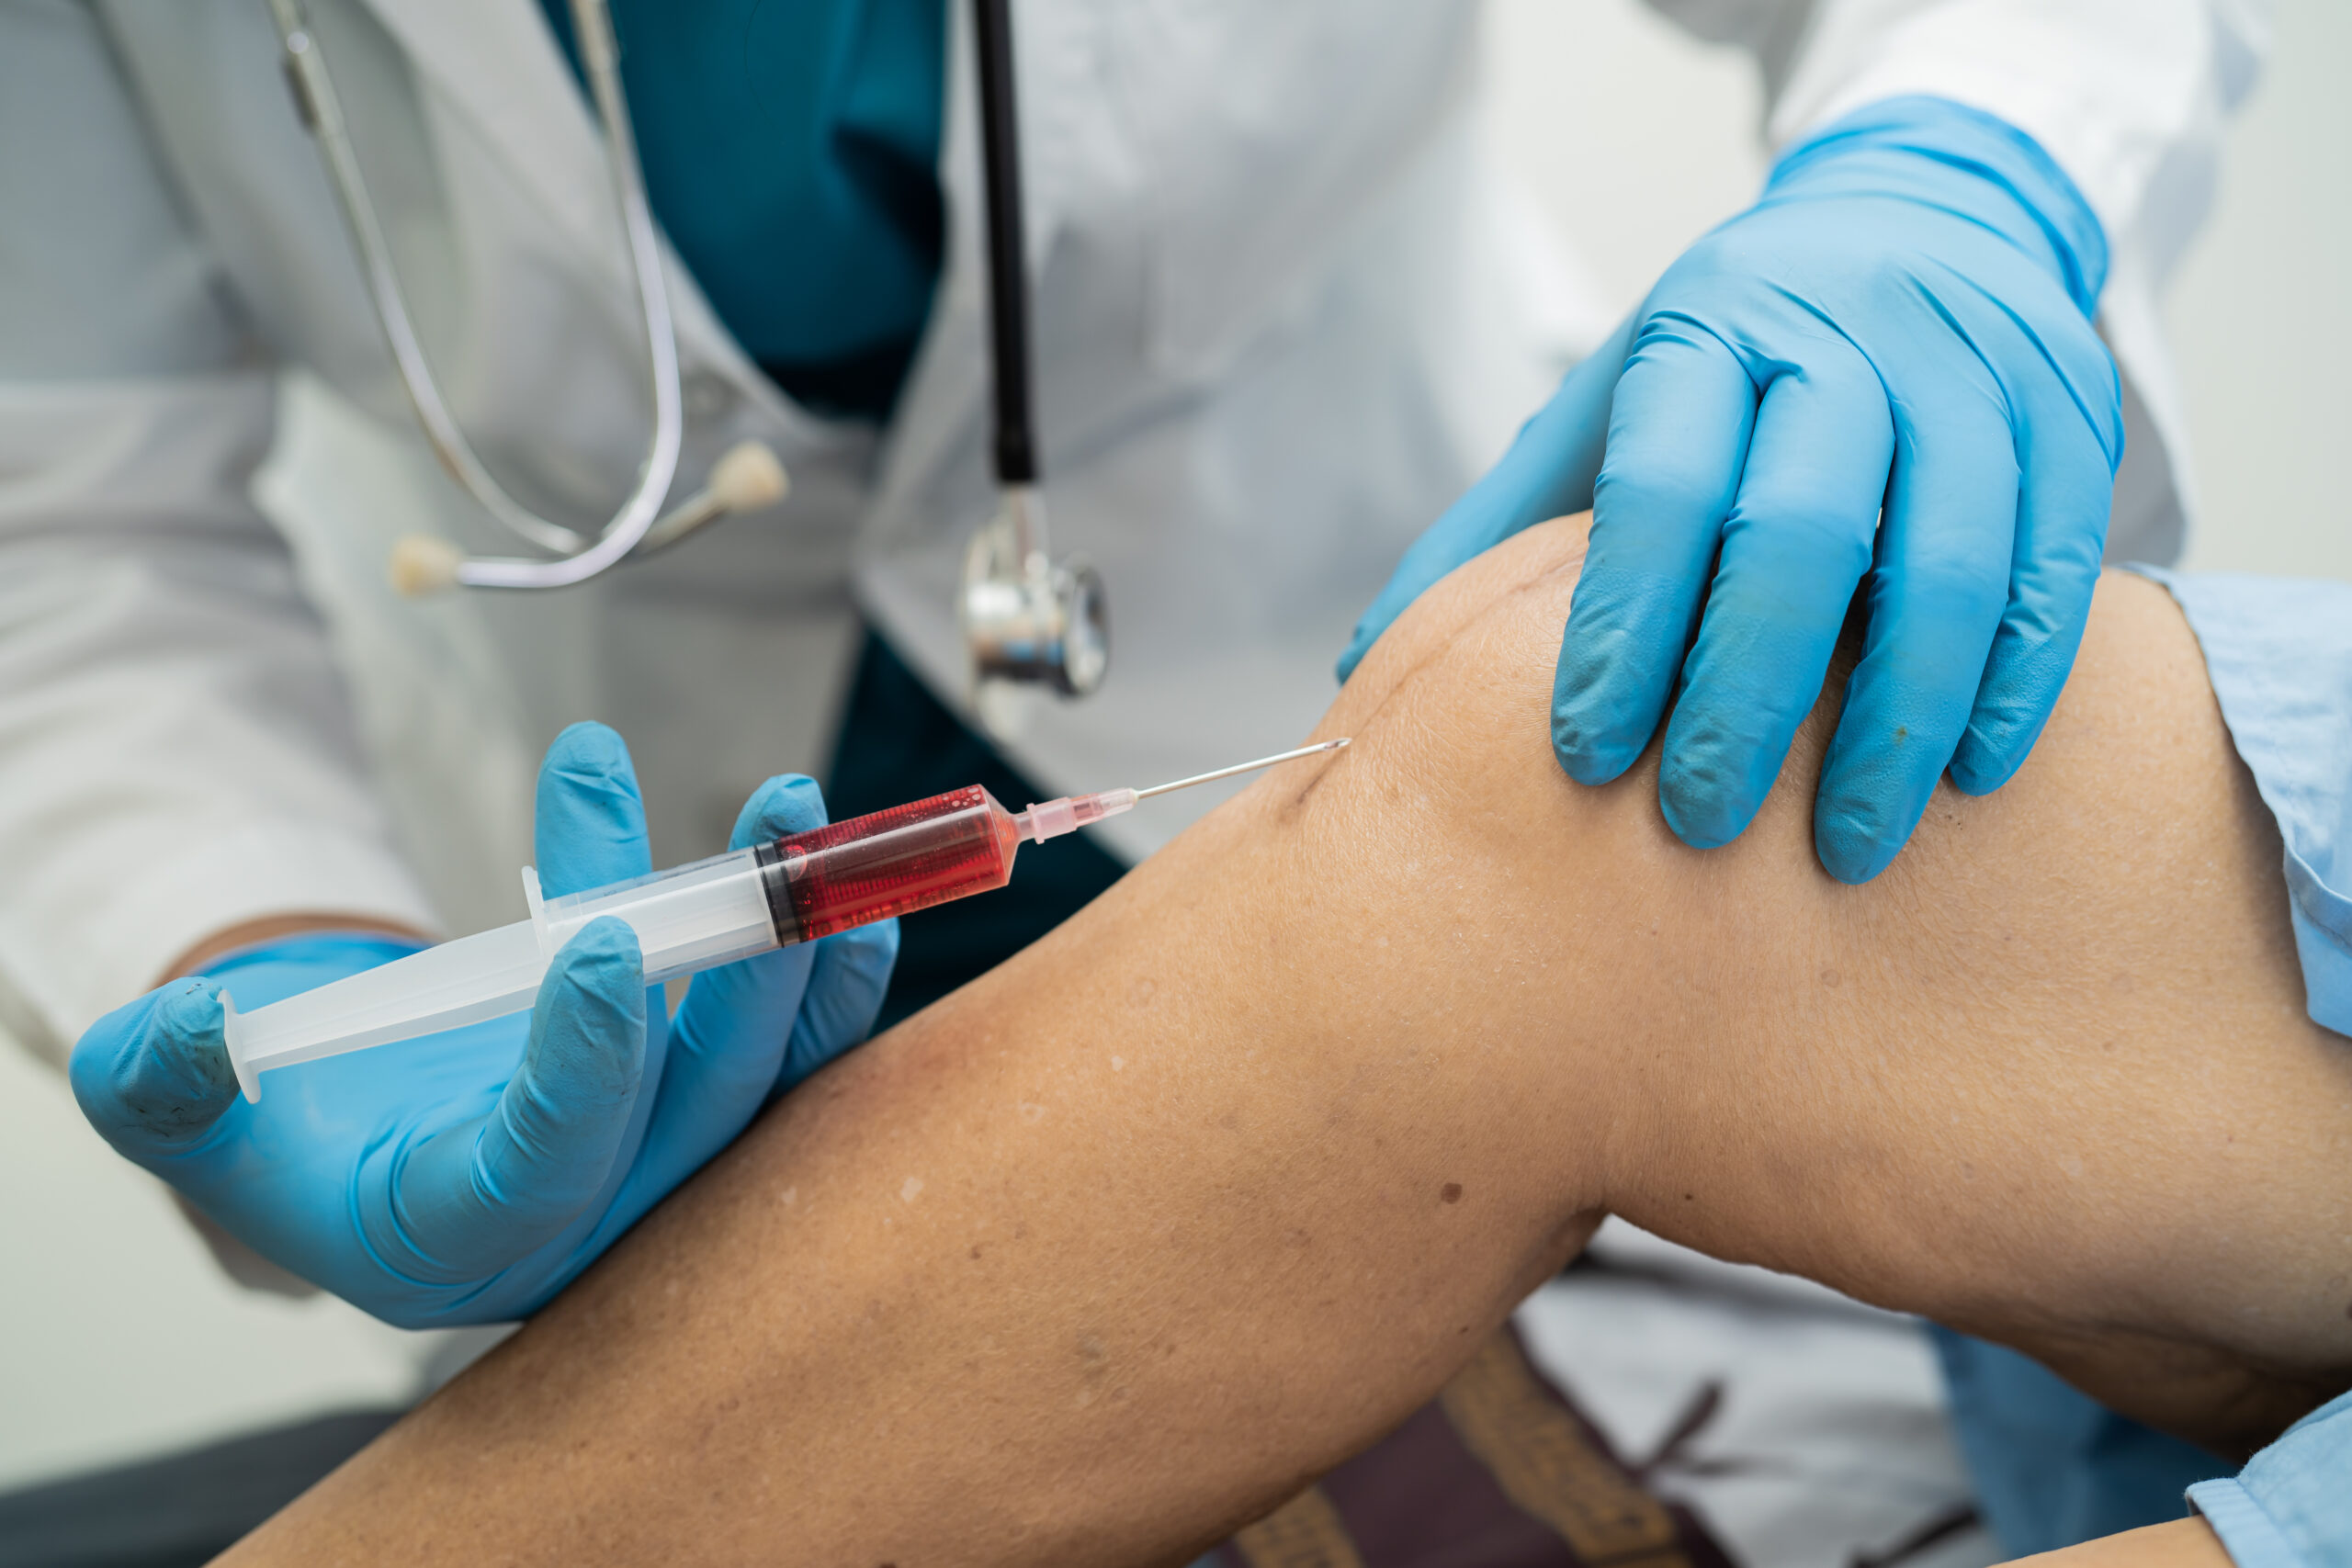 Are Platelet-rich plasma (PRP) injections right for you?